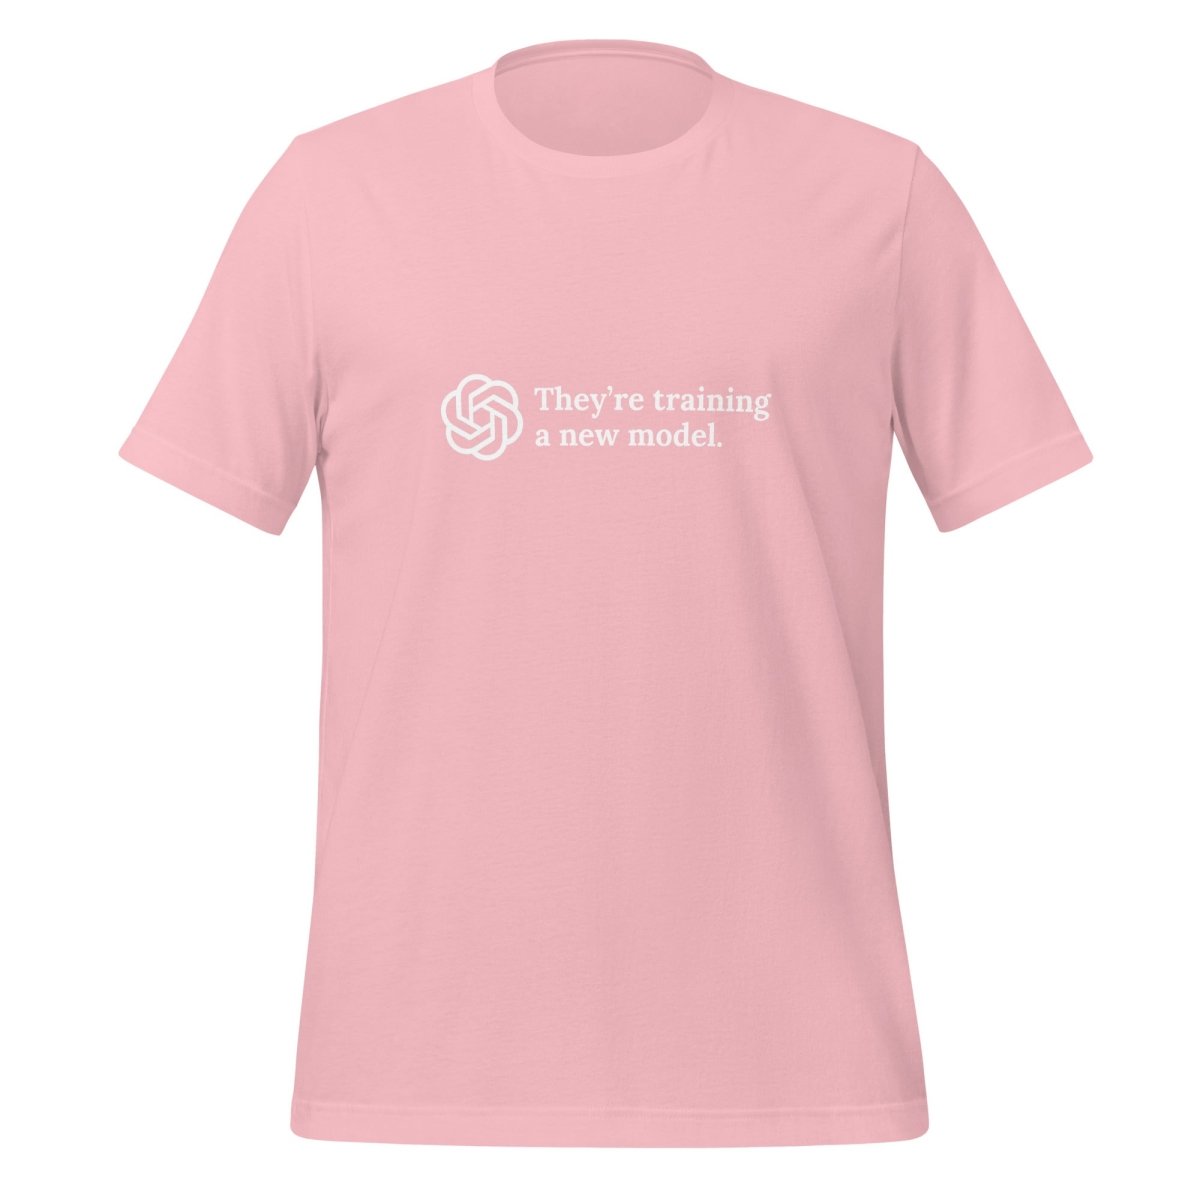 They're training a new model. T - Shirt (unisex) - Pink - AI Store